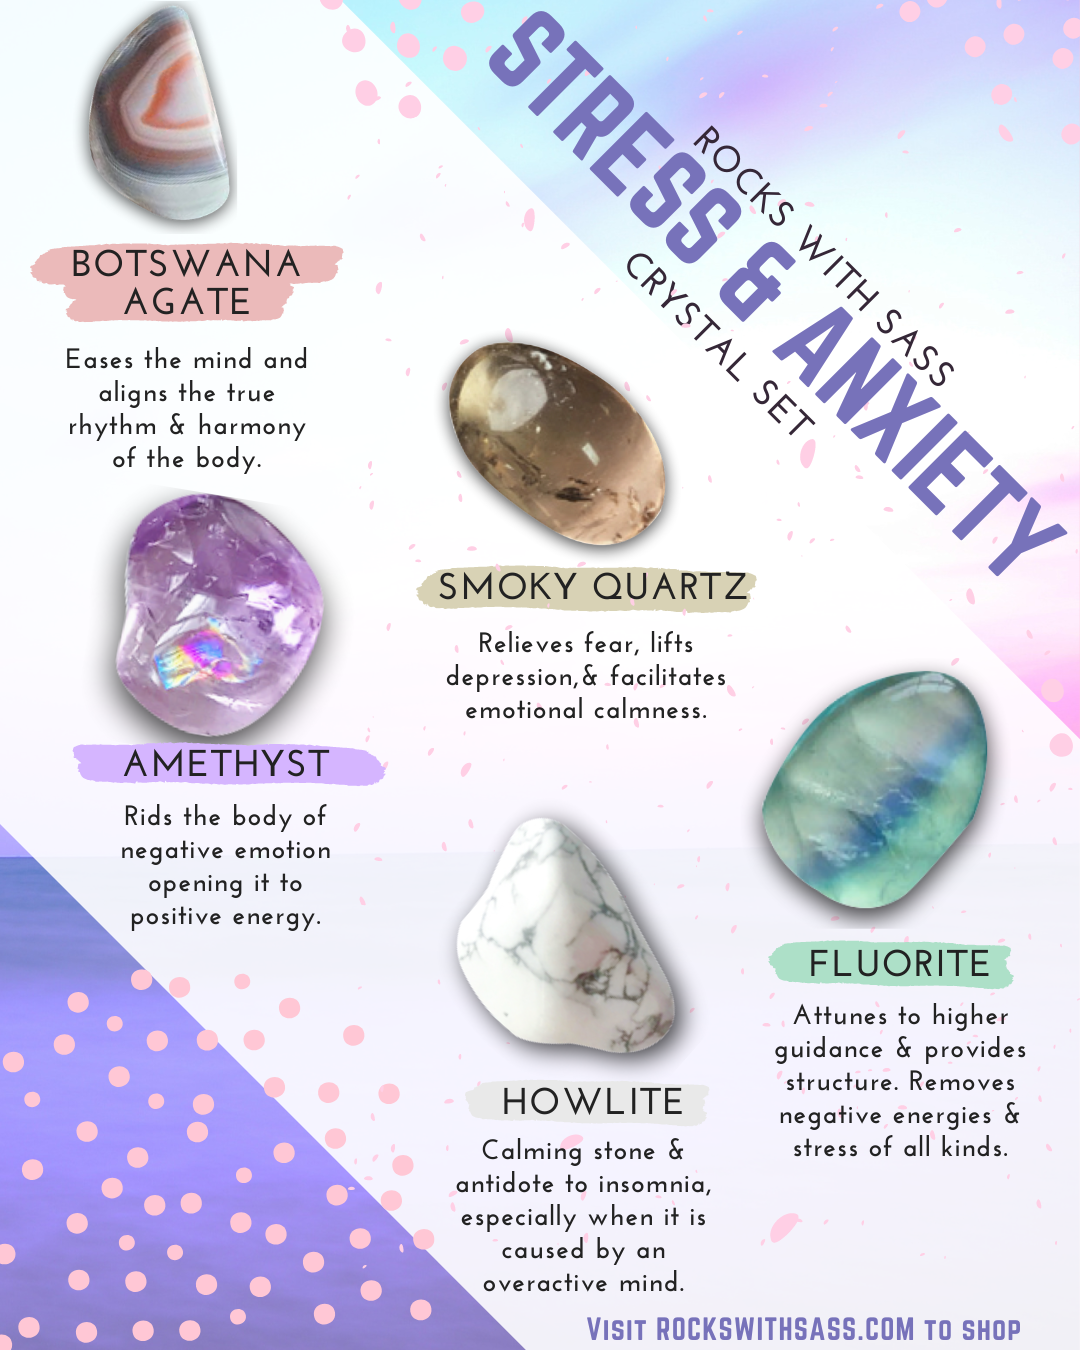 Stress and Anxiety Crystal Set